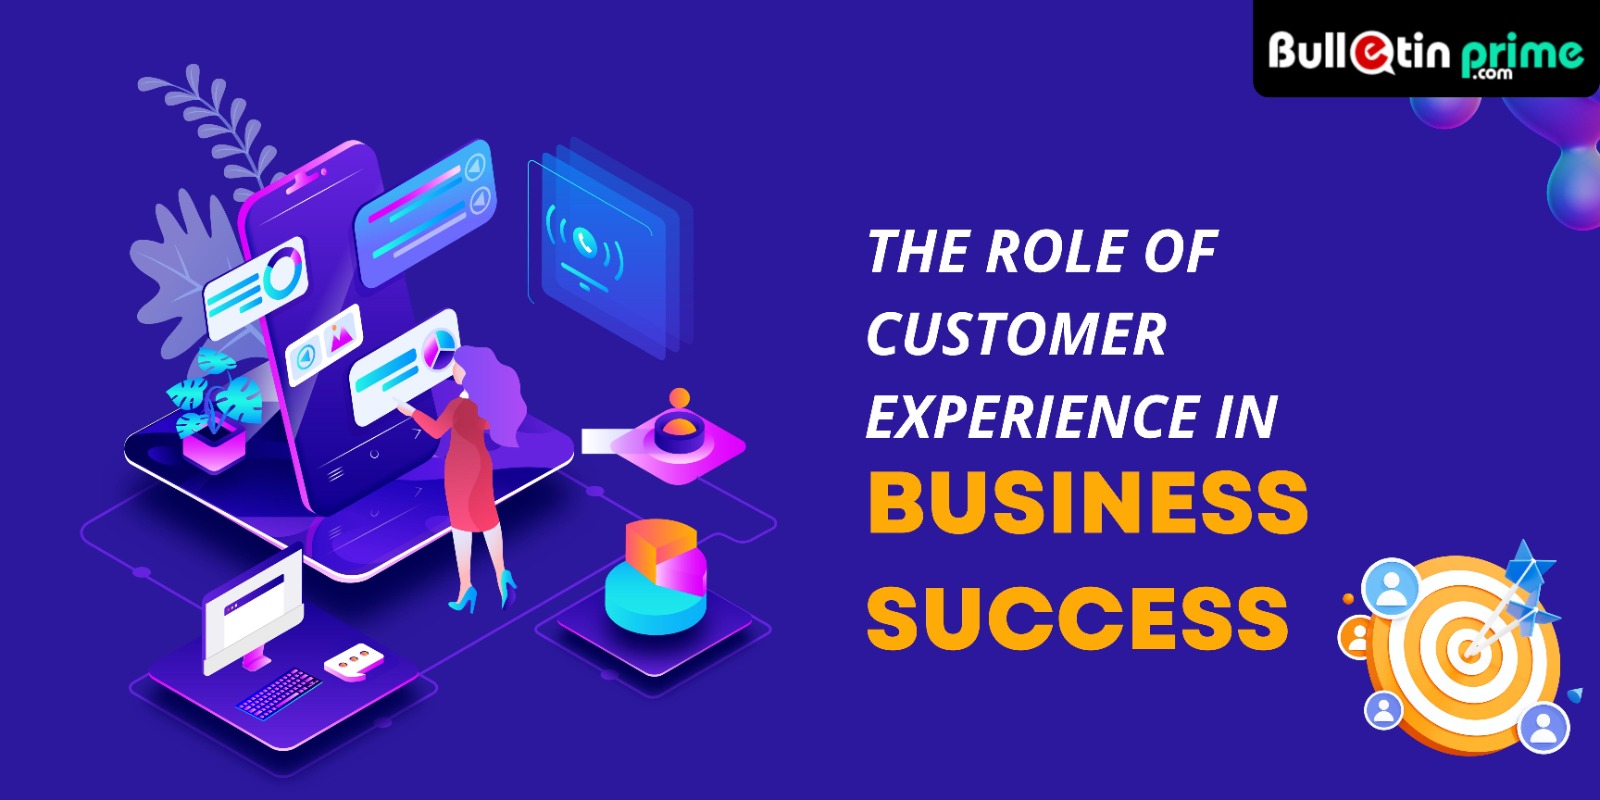 The Role of Customer Experience in Business Success